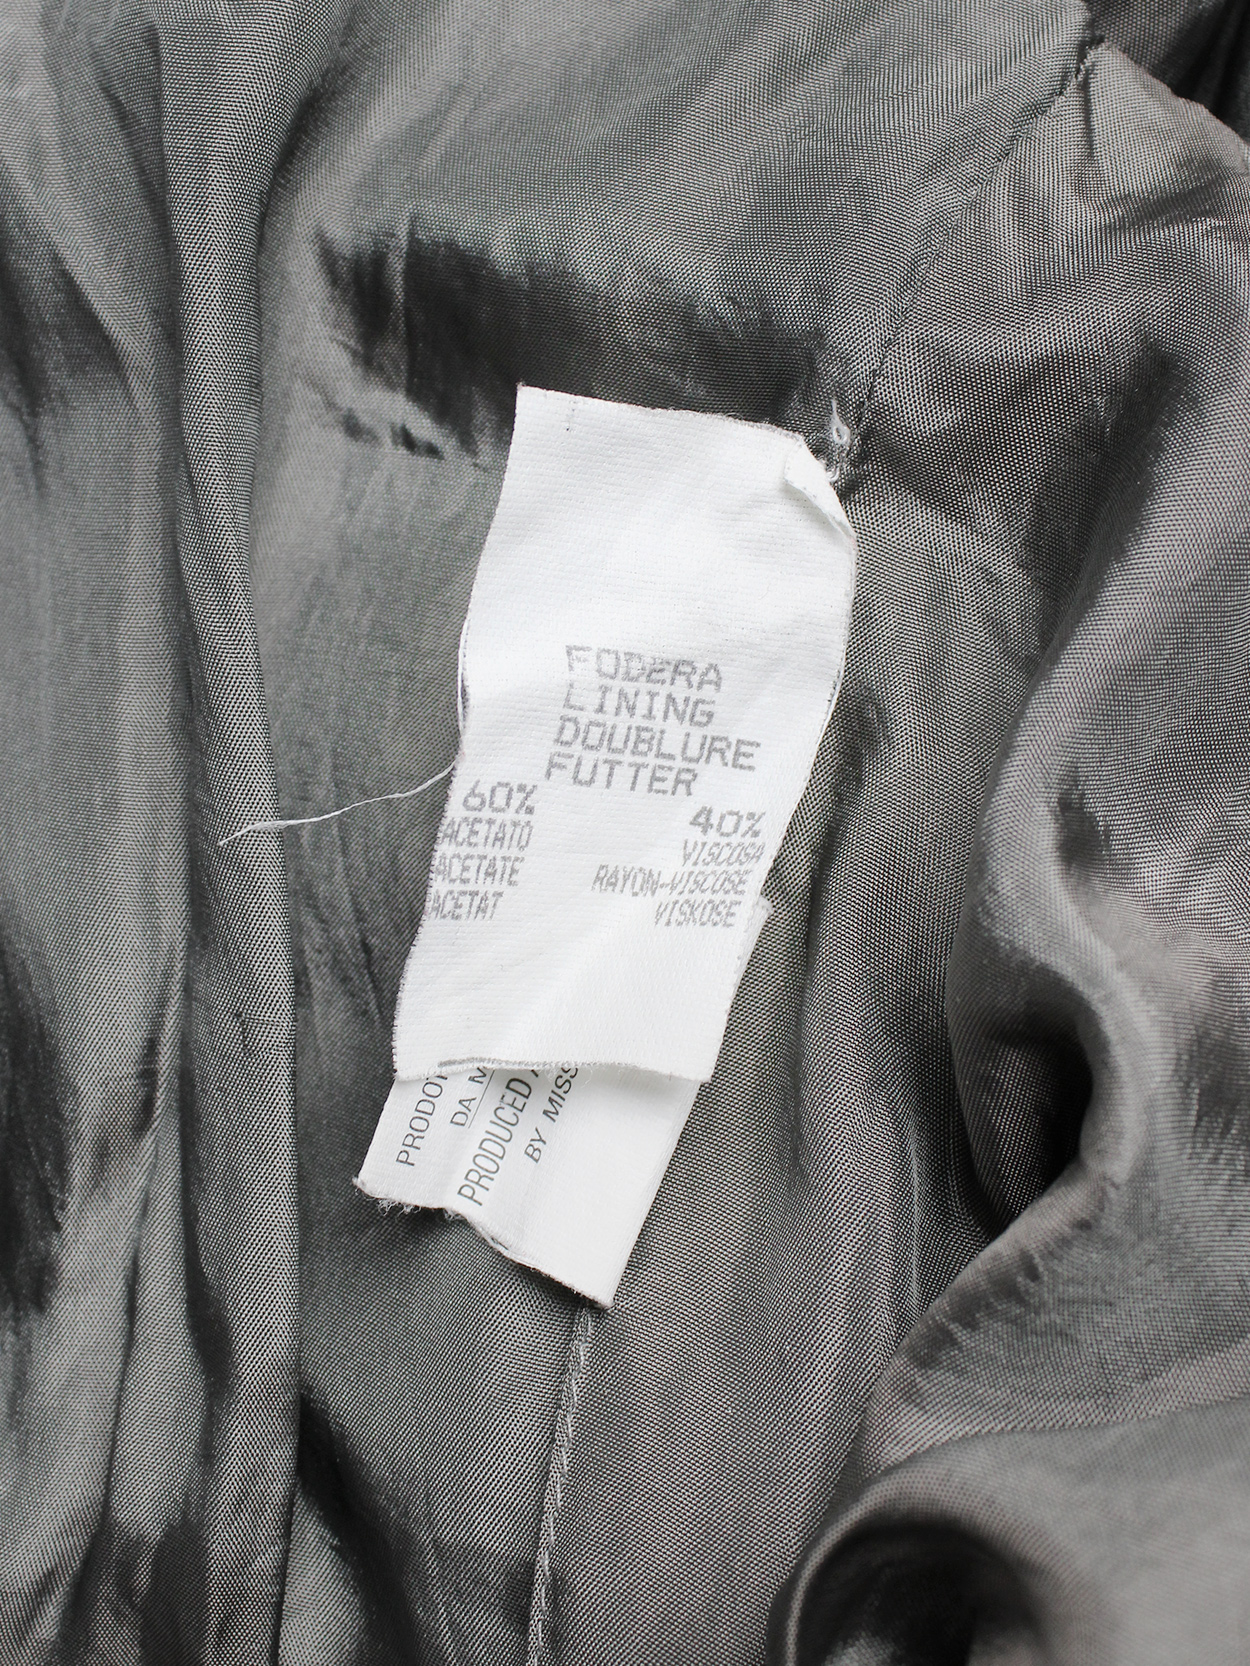 Maison Martin Margiela grey knit top with longer exposed lining — fall ...